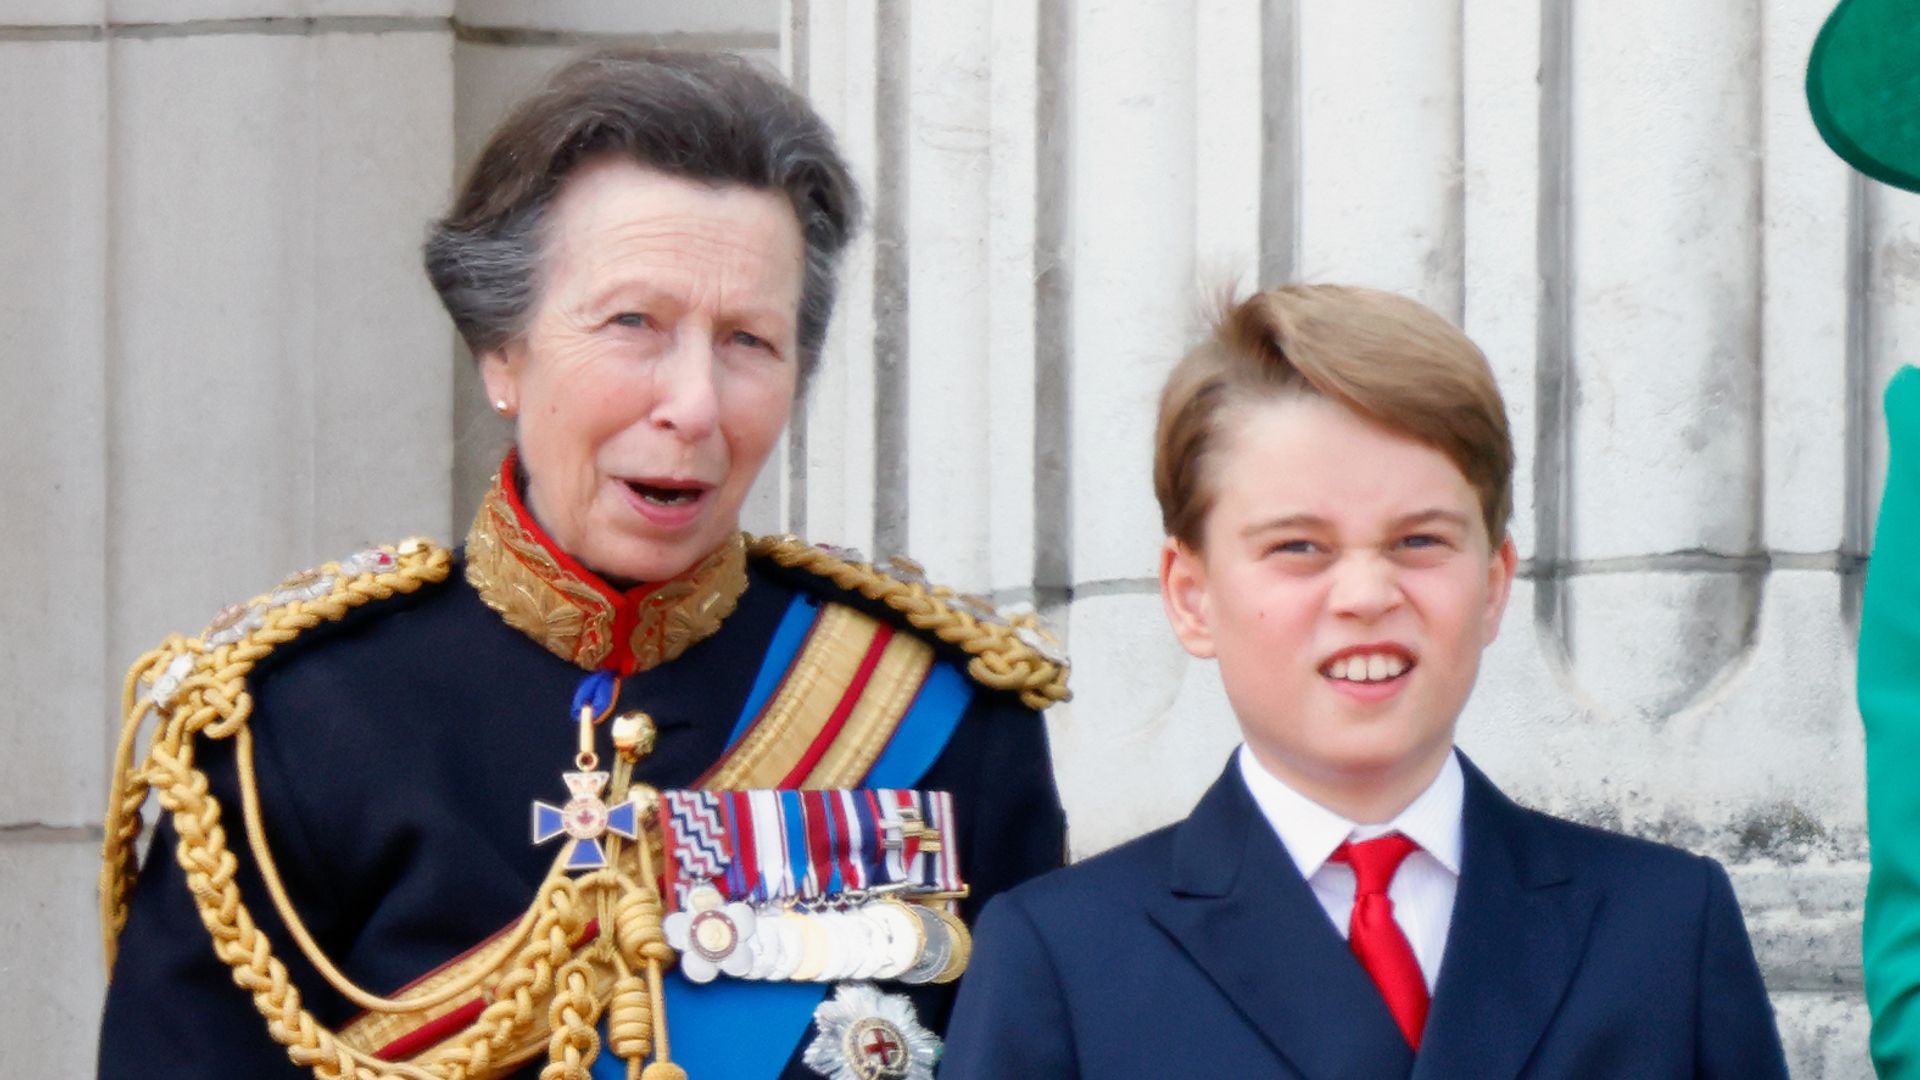 Princess Anne watches the military flypast with Prince George